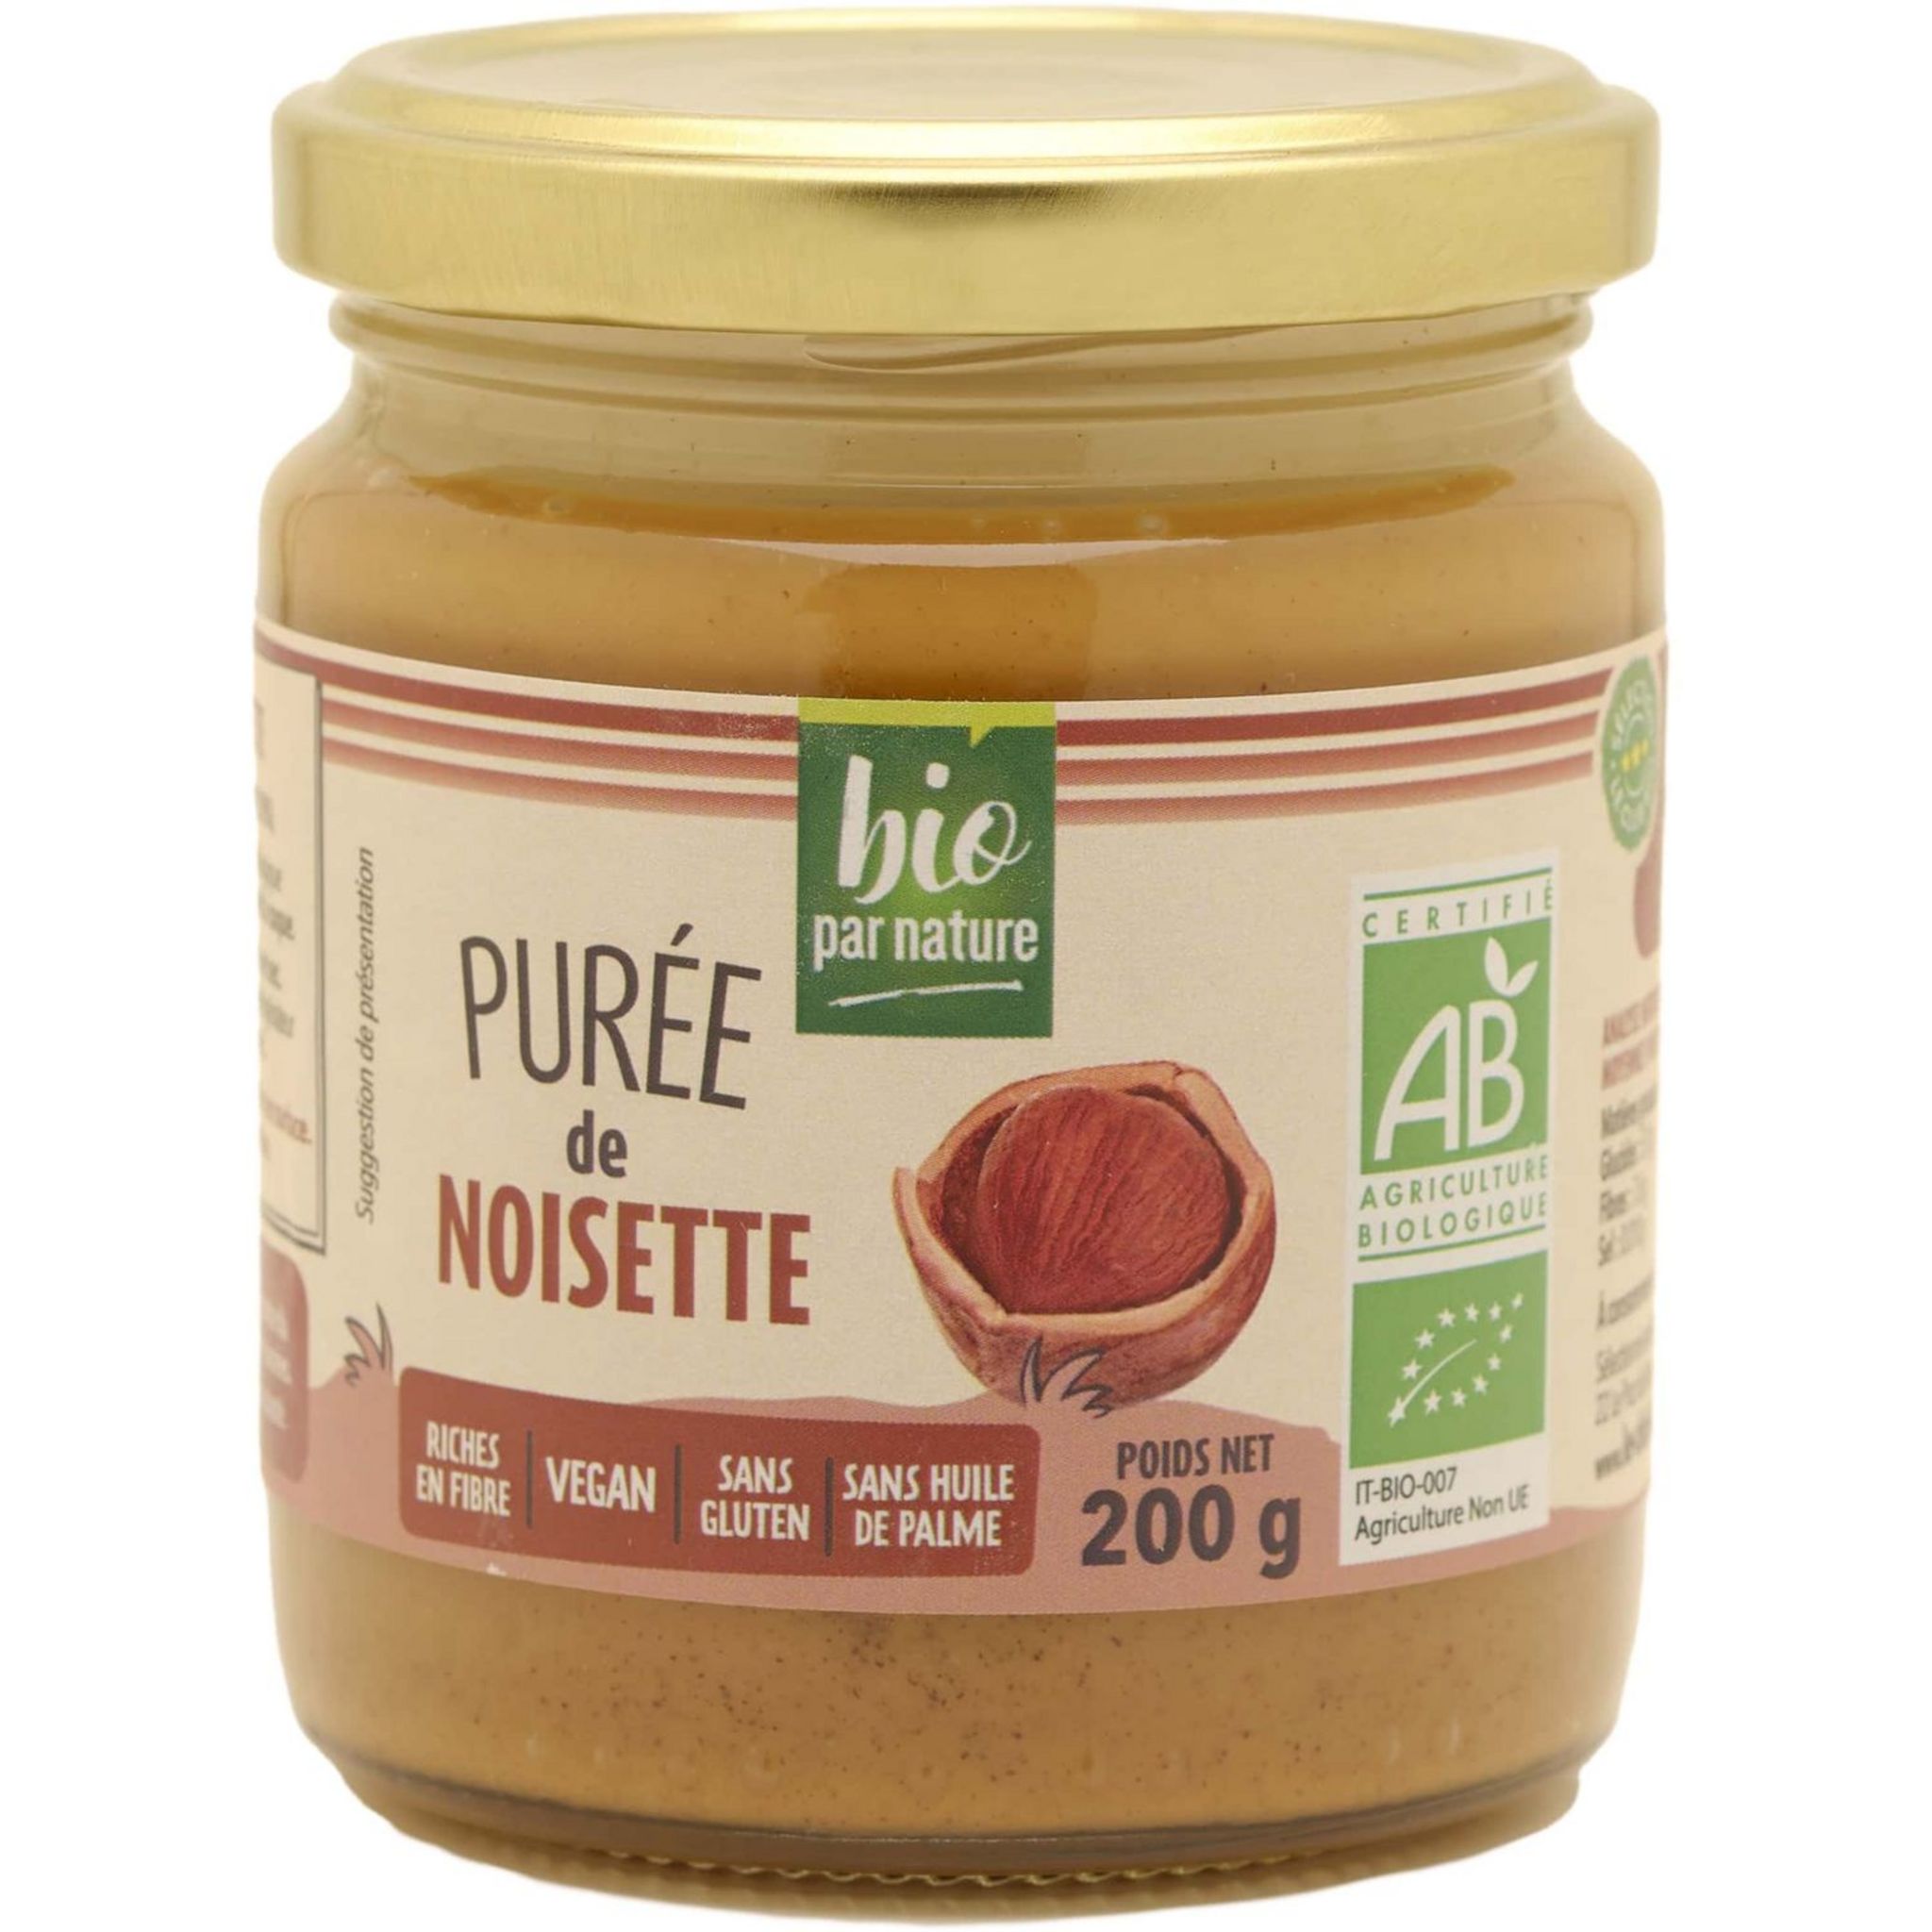 PUREE DE NOISETTE EQUITABLE BIO - day by day